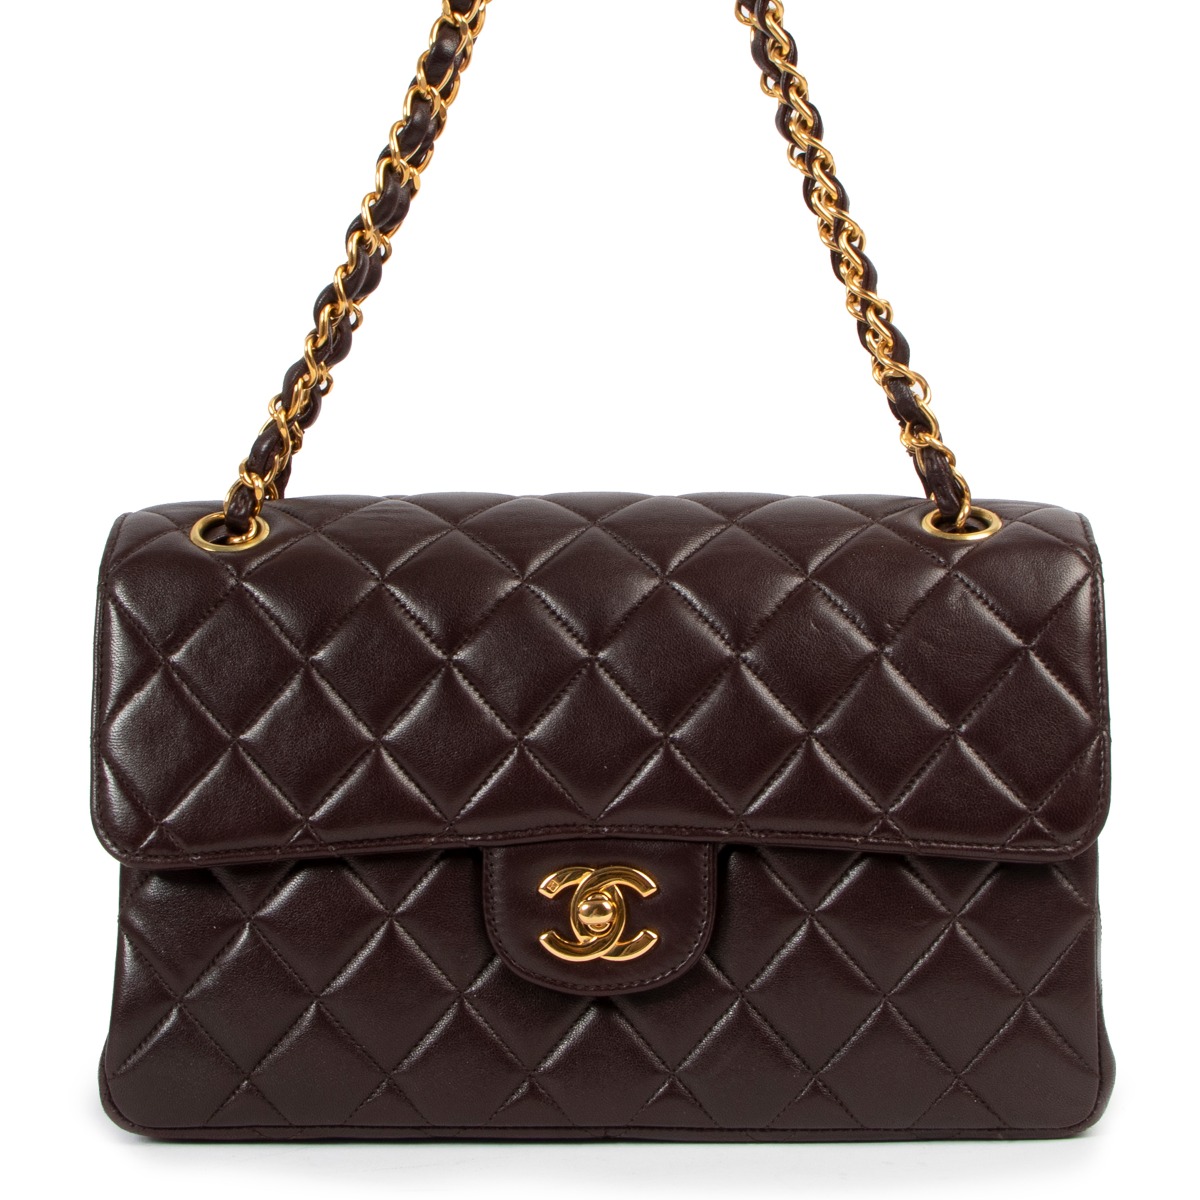 Chanel Vintage Brown Lambskin Double Sided Classic Flap Bag